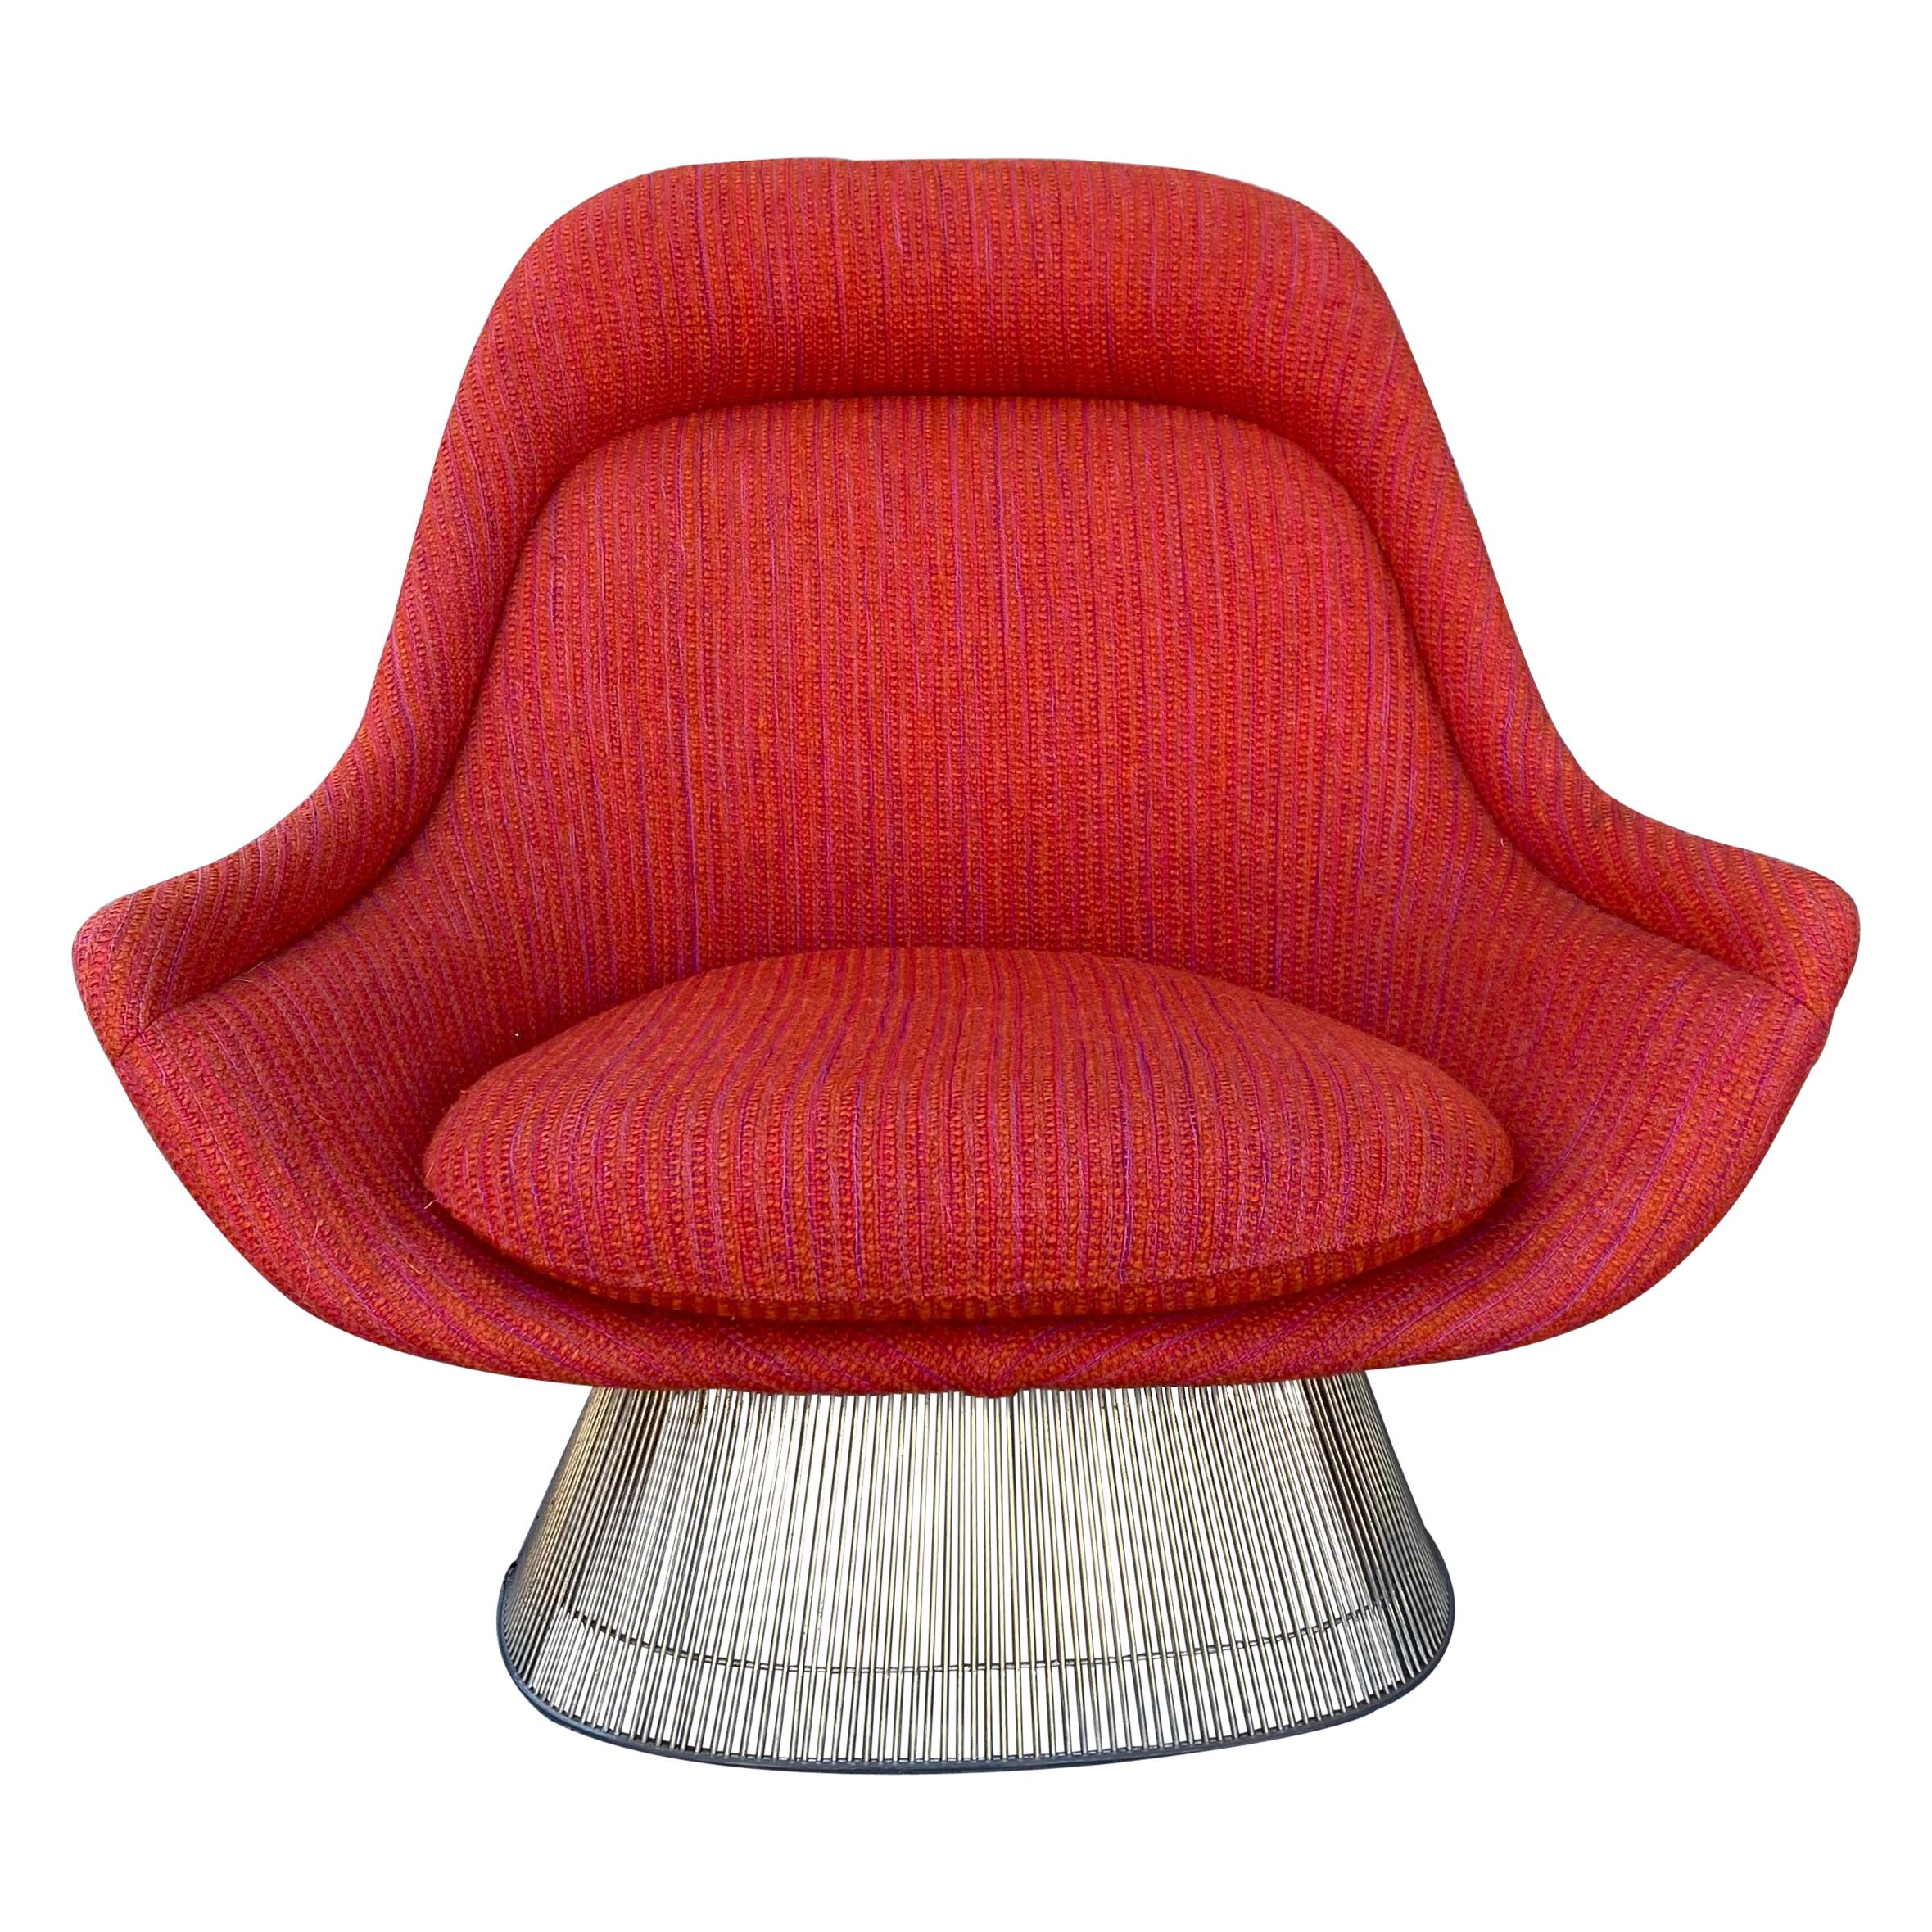 Early Warren Platner Large Wire Lounge Chair for Knoll , C.1970 Cado Wool Woven